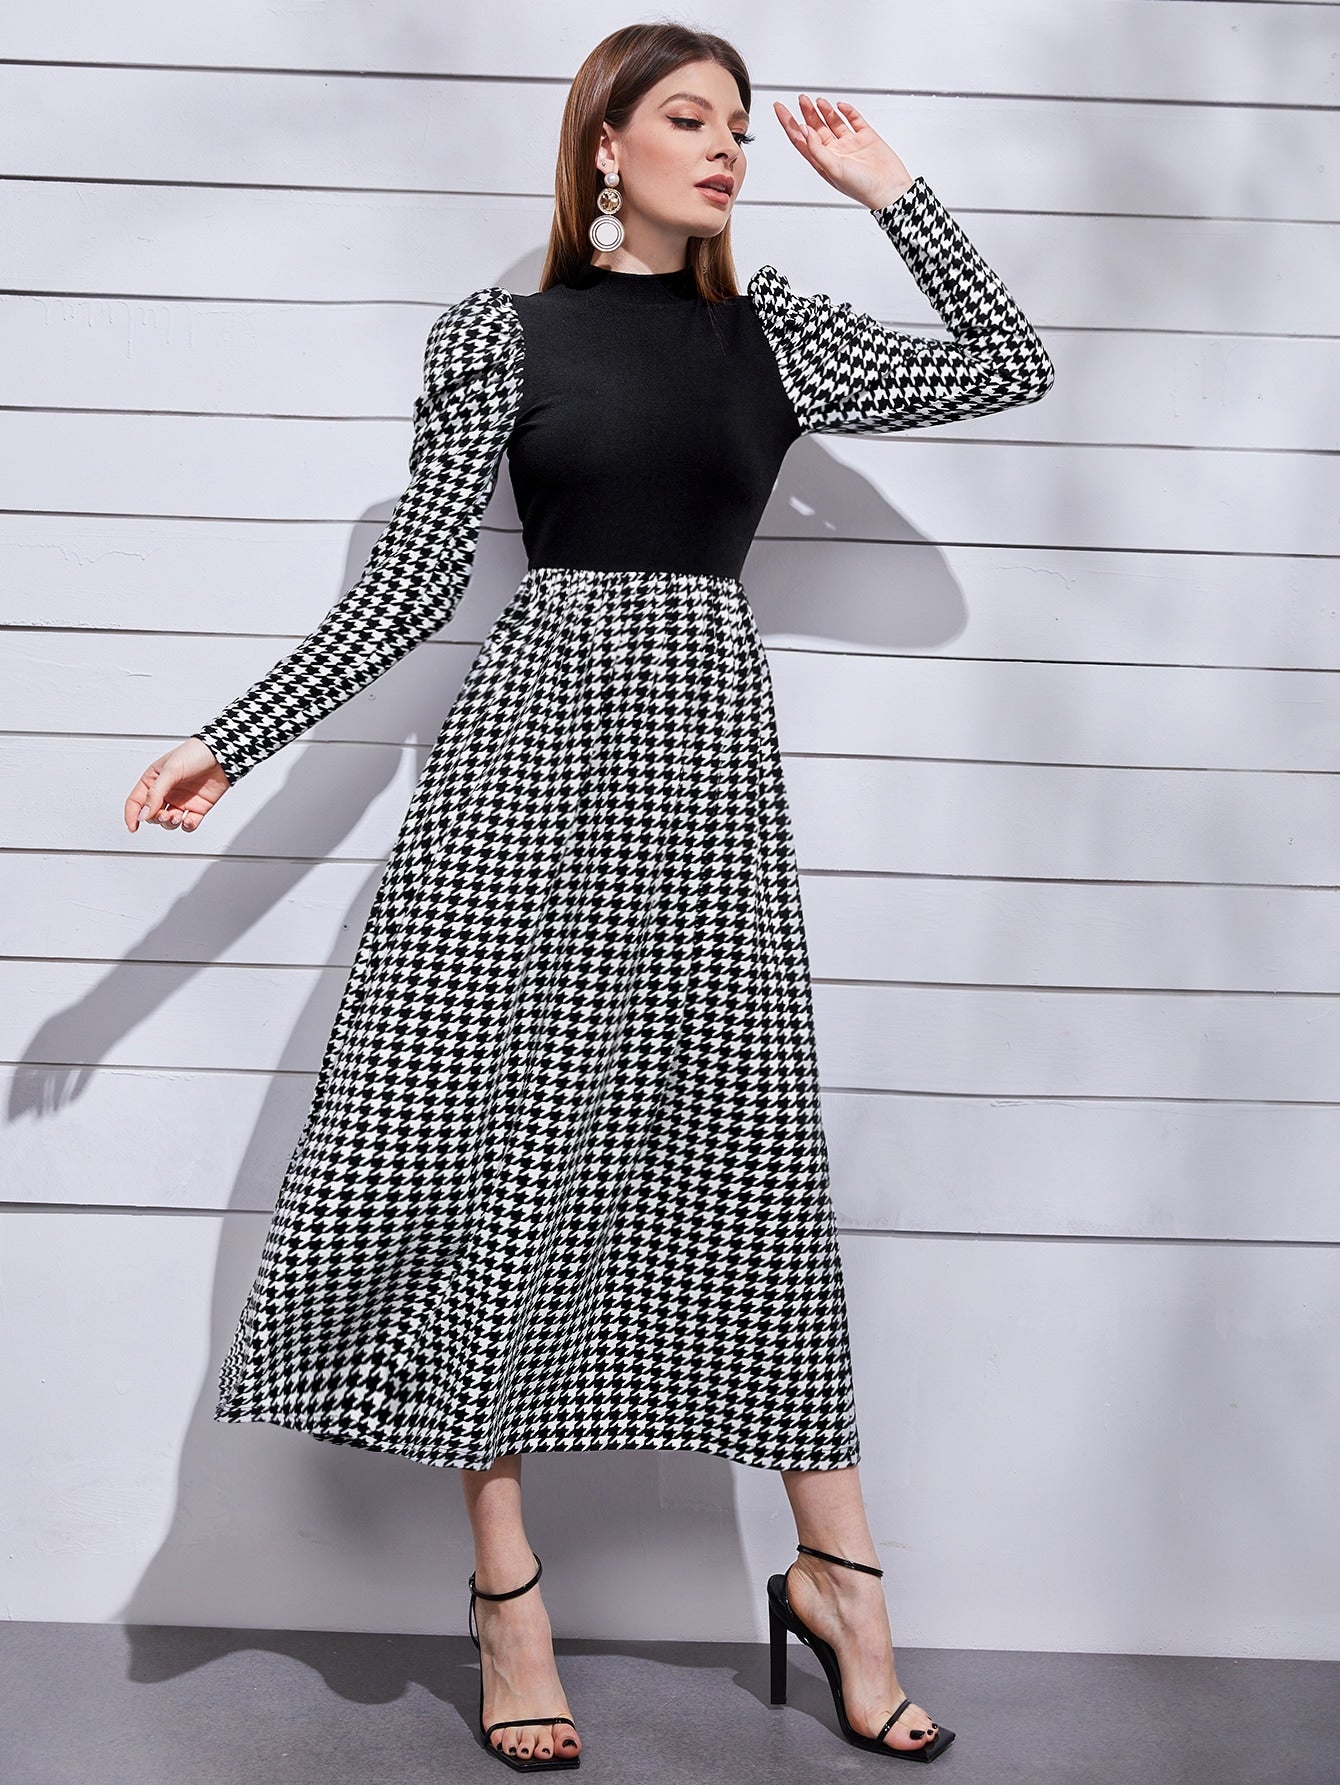 RANMO tiered midi dress Plus Slogan Tee & Houndstooth Leggings (Color :  Black and White, Size : 2XL) : Buy Online at Best Price in KSA - Souq is  now : Fashion